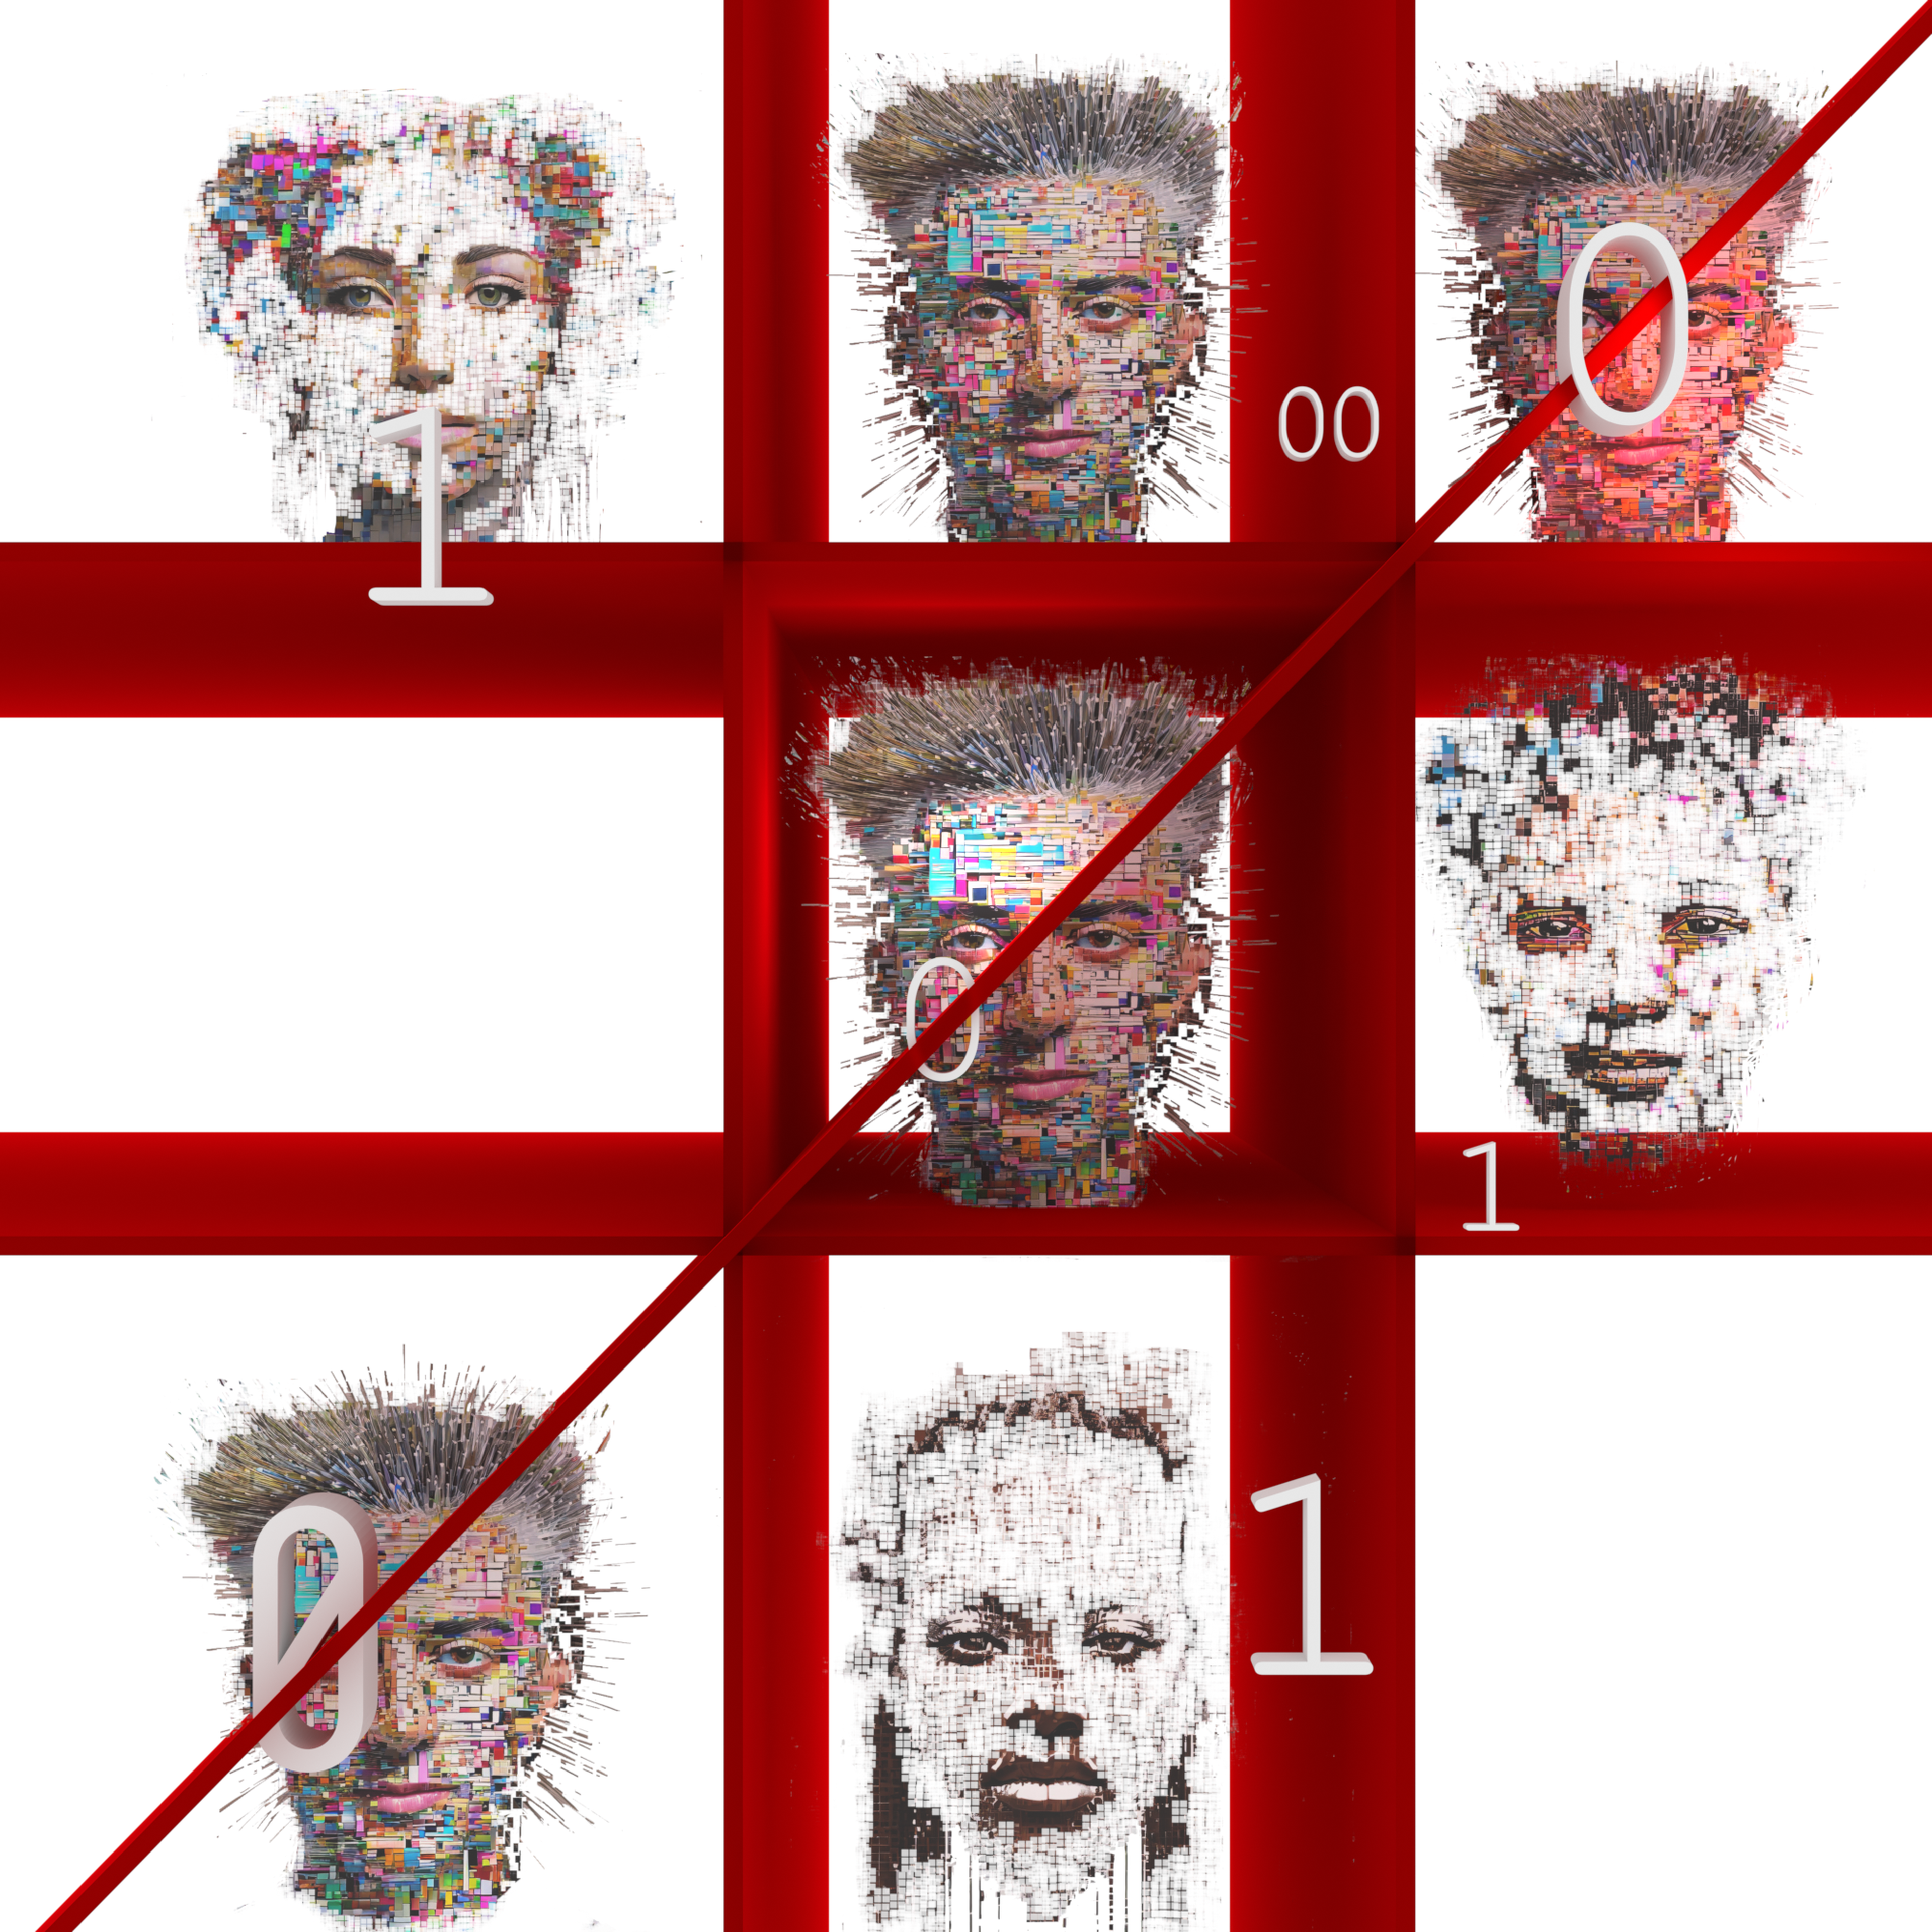 A tic-tac-toe board with human faces as digital blocks, symbolizing how AI works on pre-existing, biased online data for information processing and decision-making